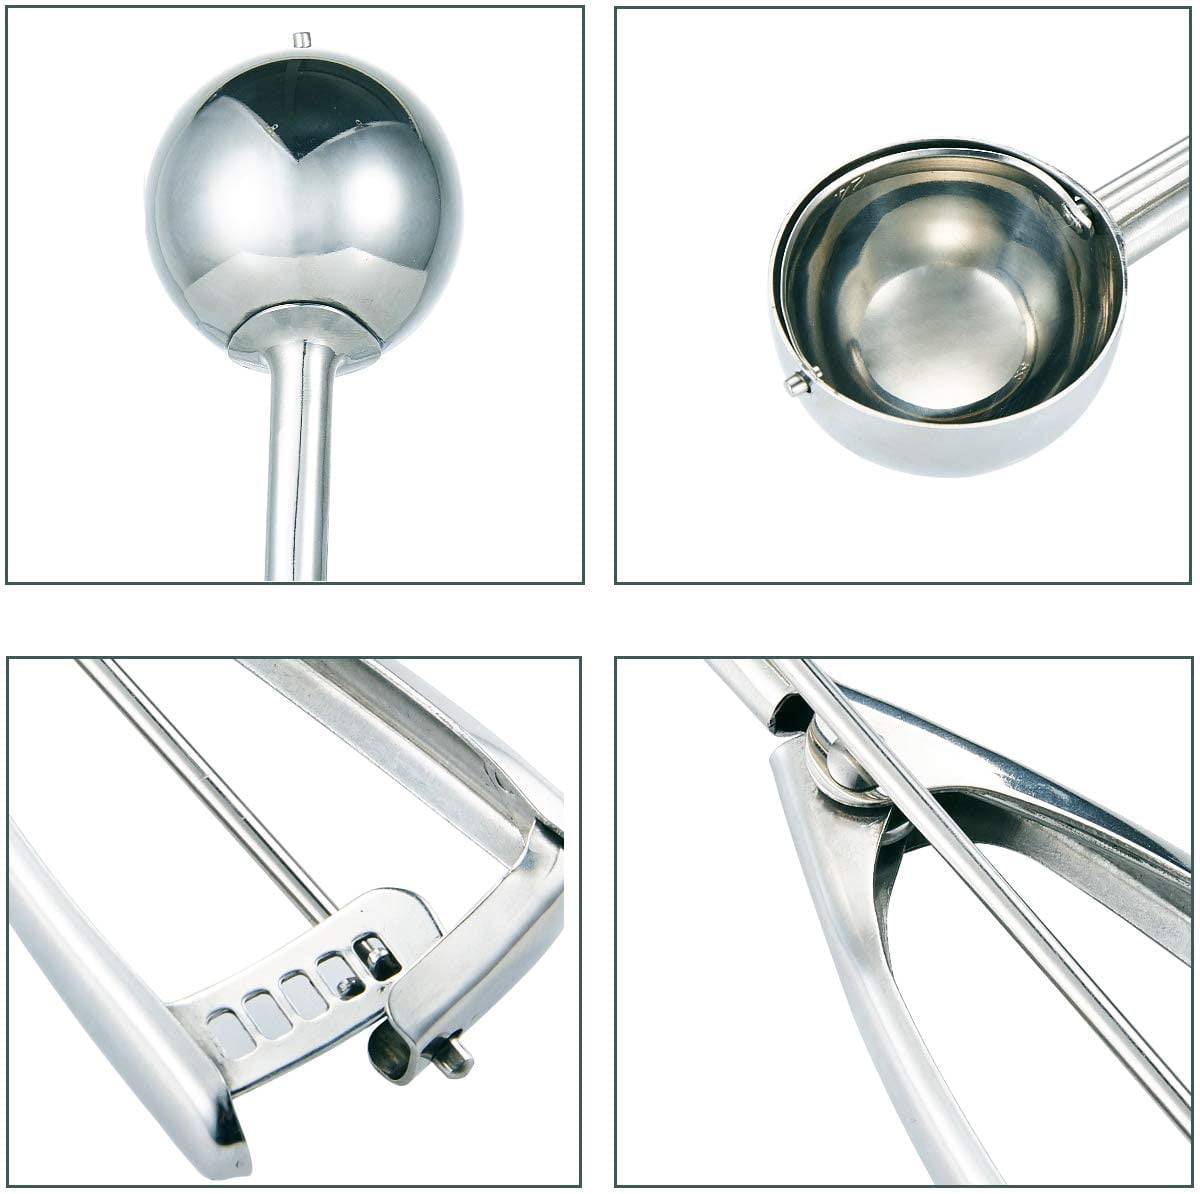 Small Cookie Scoop 1 Tbsp/15ml/0.5 oz Ball, Cookie Dough Scoop for Baking - Spring-Loaded Ice Cream Scoop 18/8 Stainless Steel Secondary Polishing 